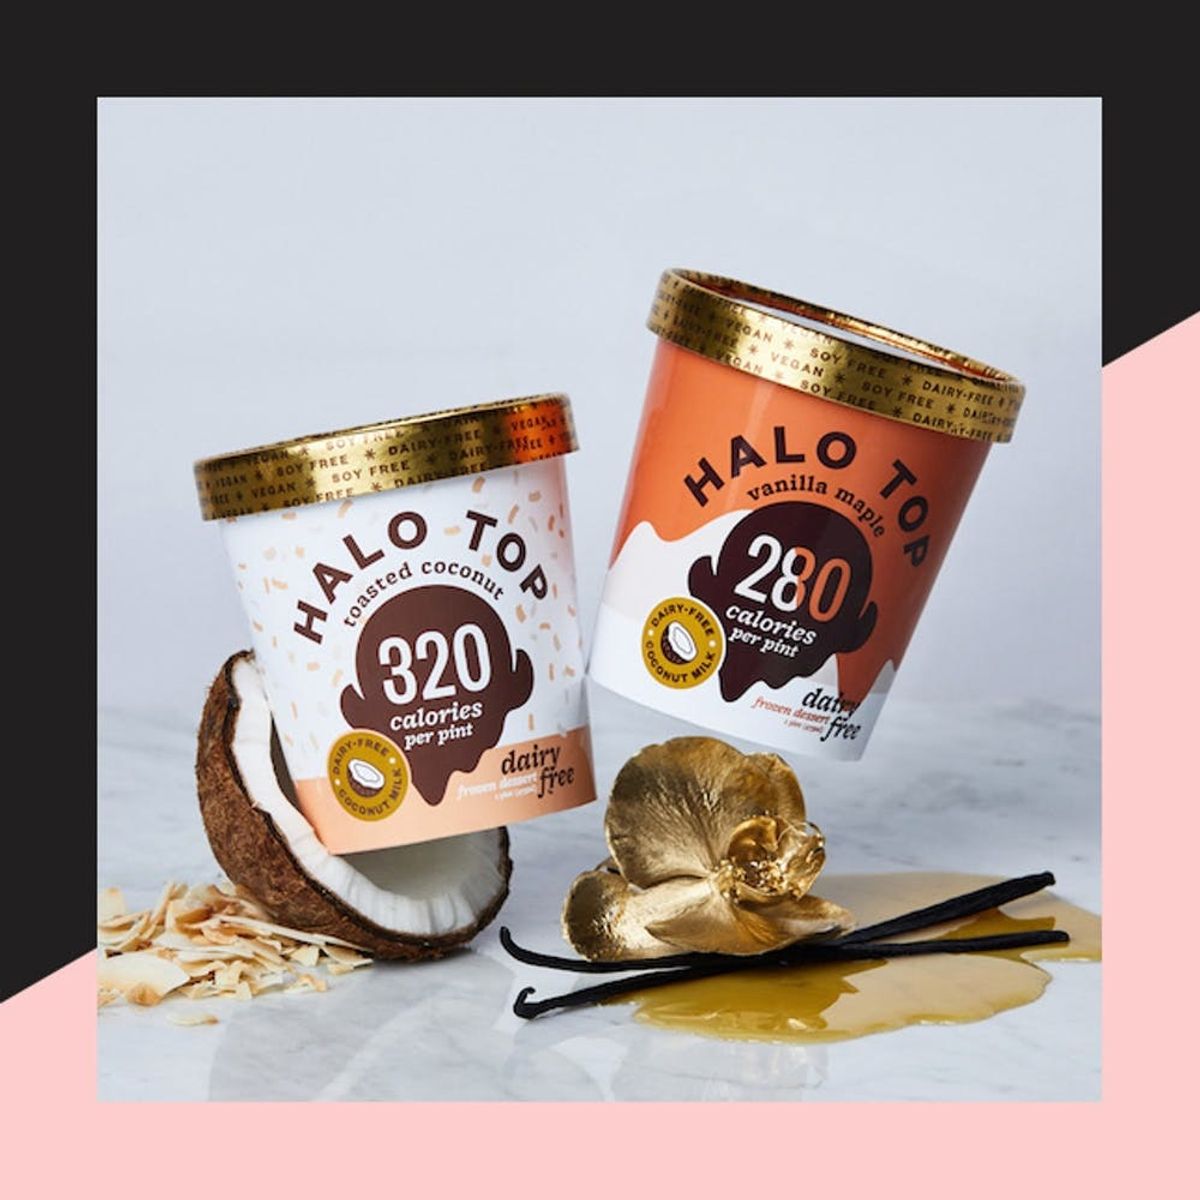 Halo Top Creamery’s Vegan, Non-Dairy Line Just Doubled in Size